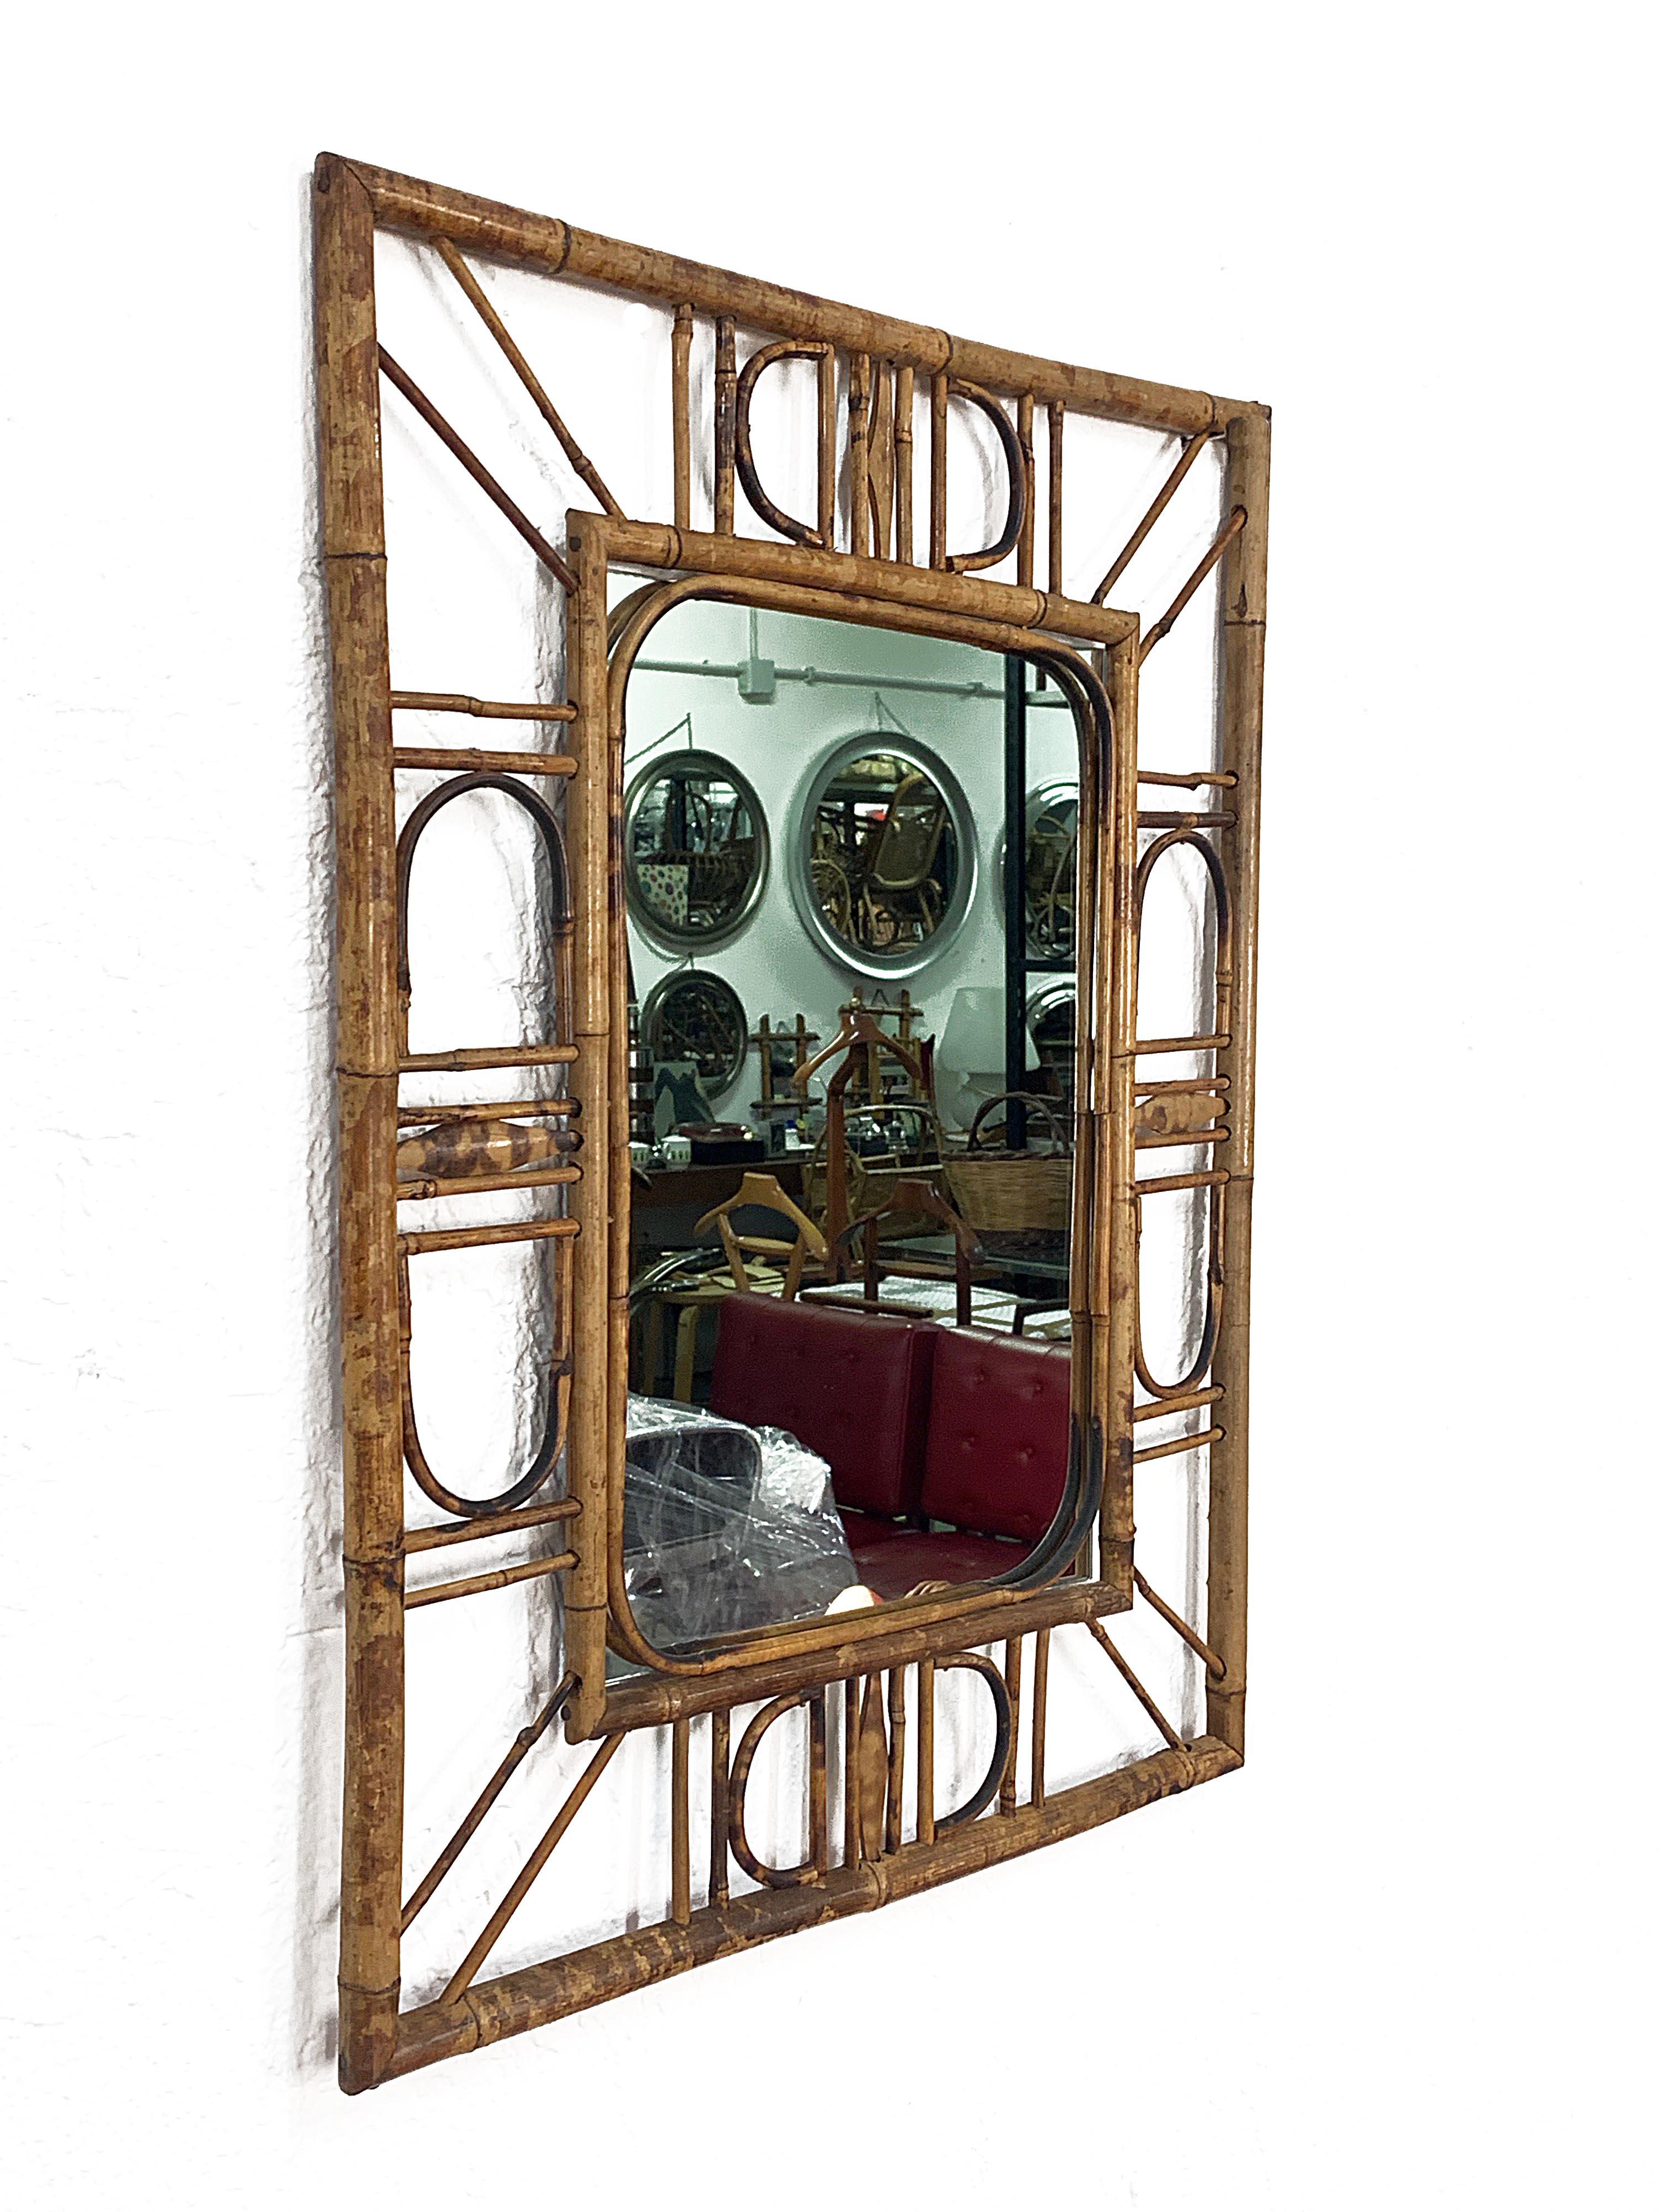 Marvellous Côte d'Azur wall mirror in bamboo and rattan. This item was produced in France during the central part of the 1960s.

The mirror its original and good vintage conditions, and the use of the materials and the lines are a clear example of